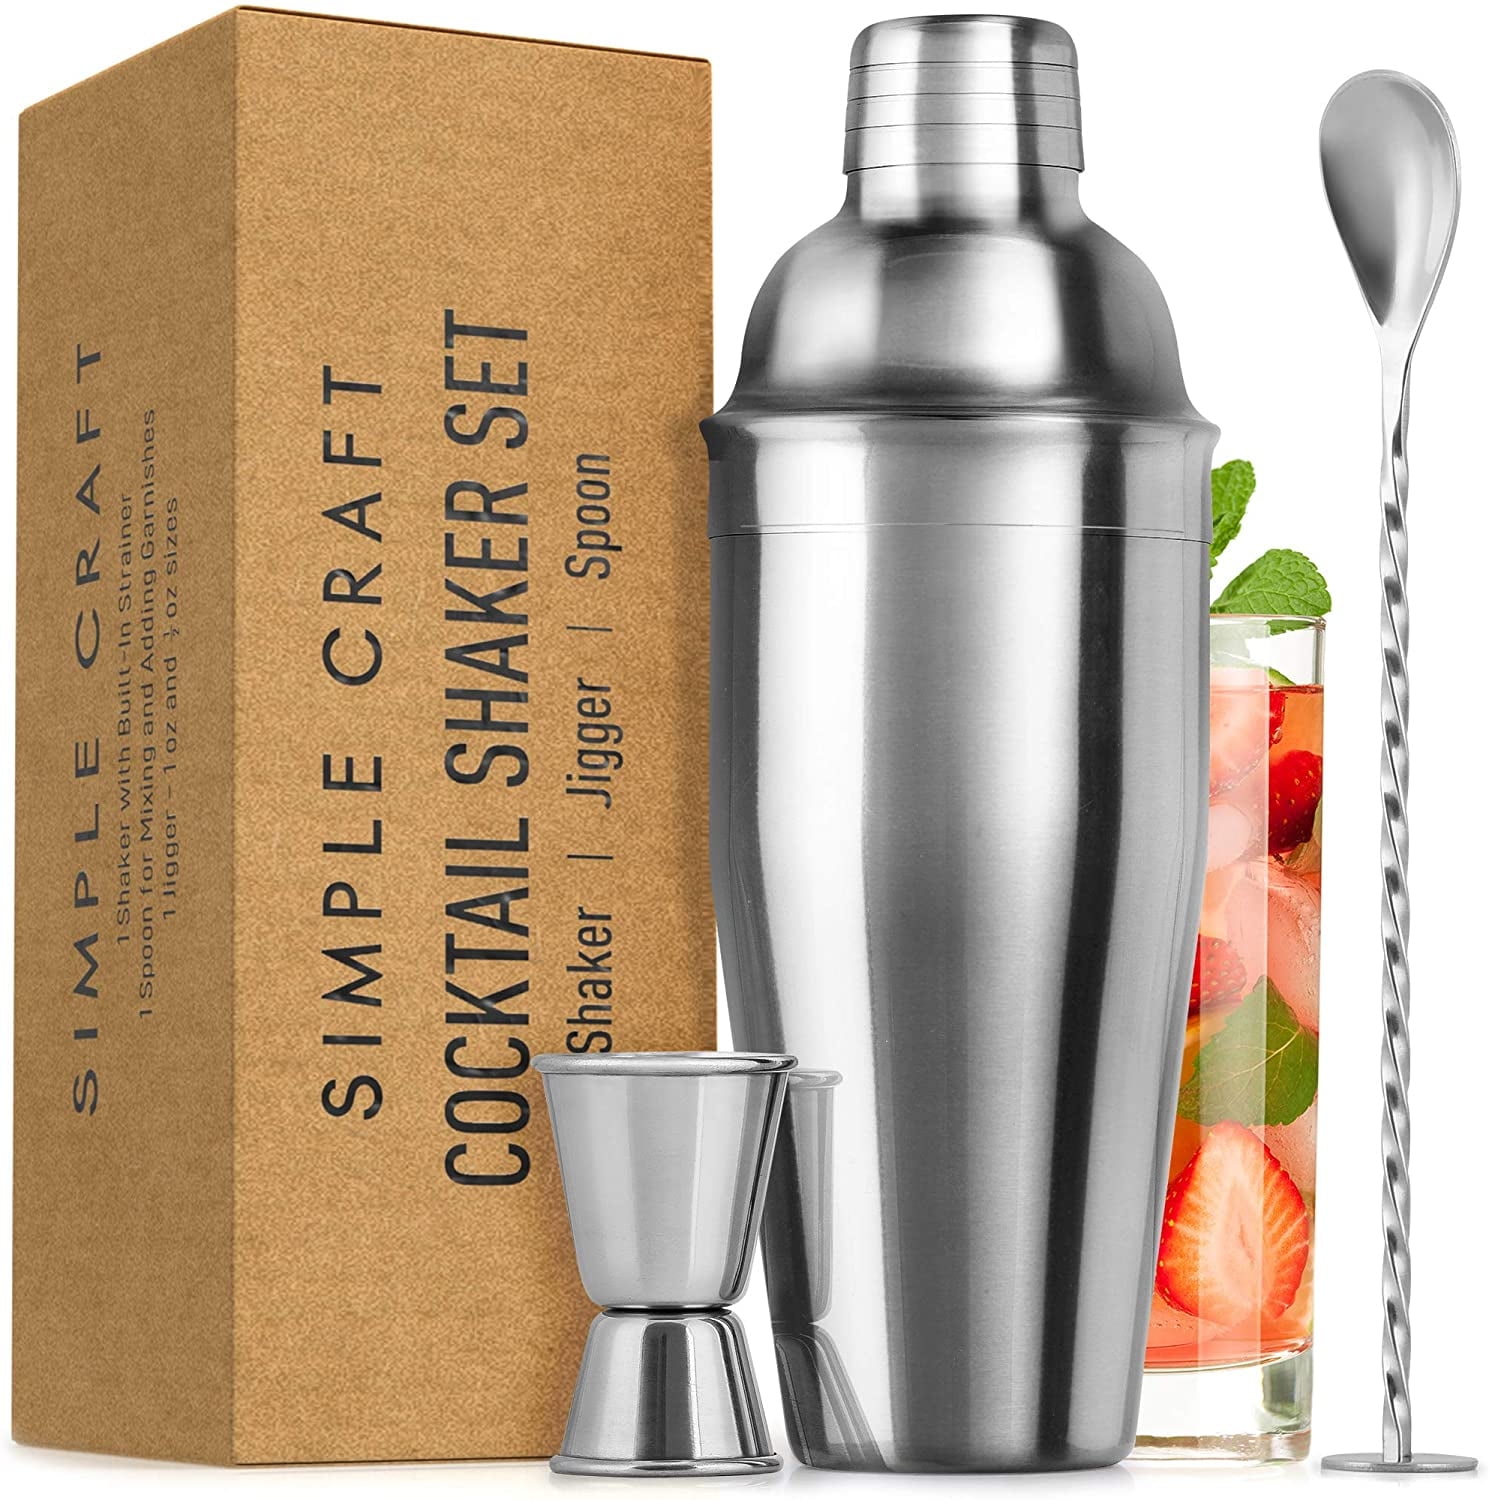 Reduce Insulated Cocktail Shaker, 20 oz - Stainless Steel with Built In  Strainer - Keeps Your Drinks Chilled - Ideal for Making Craft Cocktails -  Gray